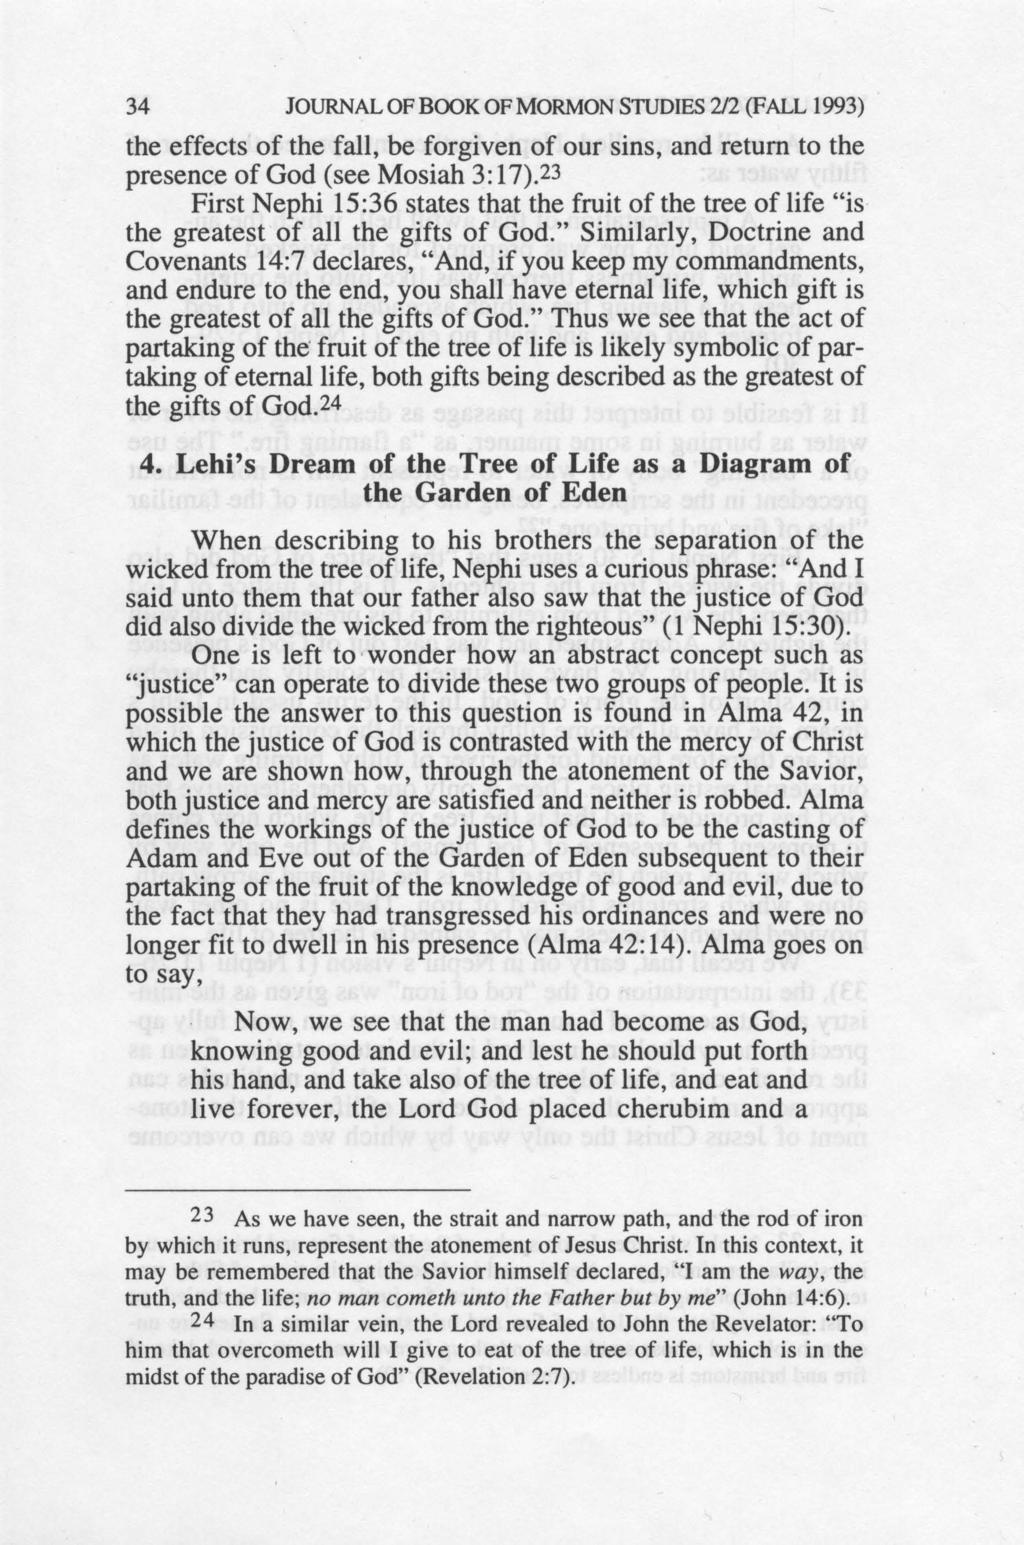 34 JOURNAL OF BOOK OF MORMON STUDIES 212 (FALL 1993) the effects of the fall, be forgiven of our sins, and return to the presence of God (see Mosiah 3: 17).